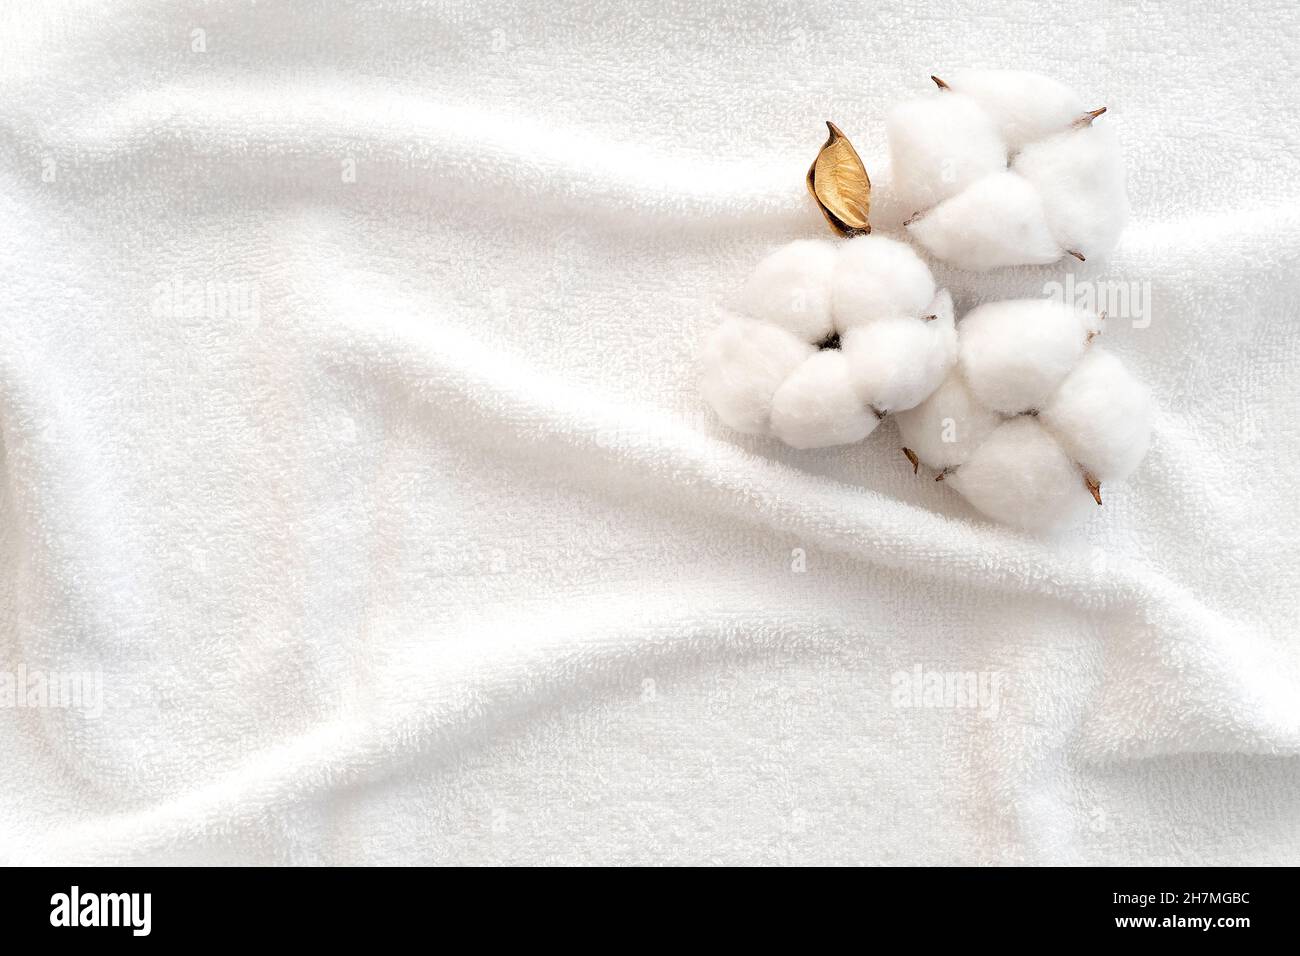 Cotton flowers on surface of white terry towel. Clean towel as texture or background. Top view. Stock Photo